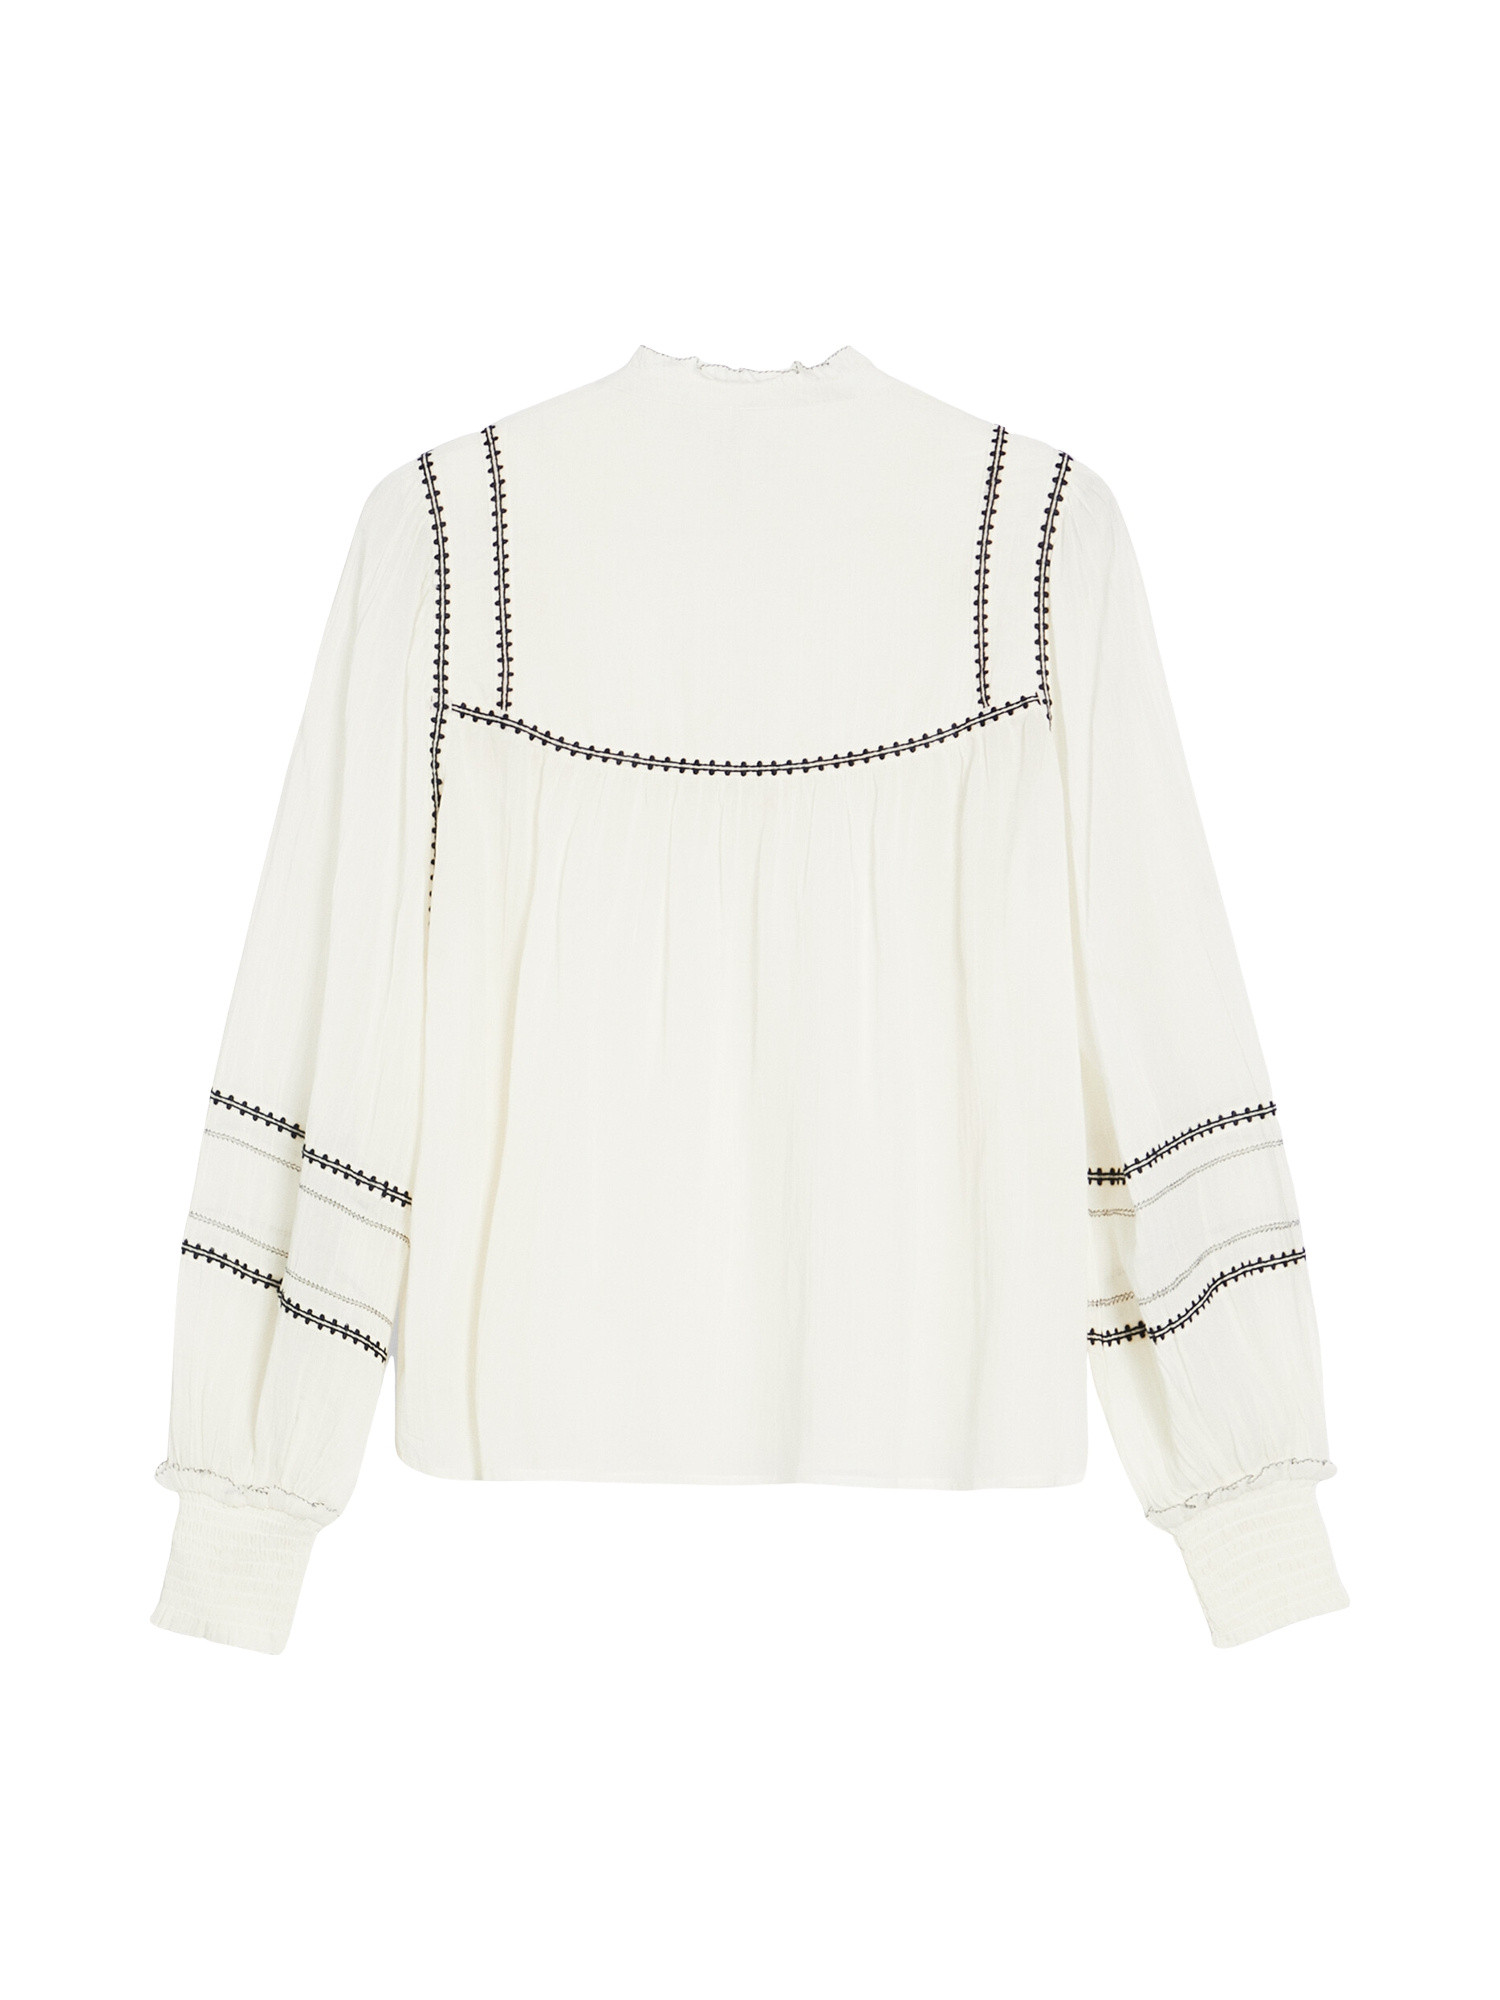 Pepe Jeans - Blouse with embroidered details, White, large image number 1